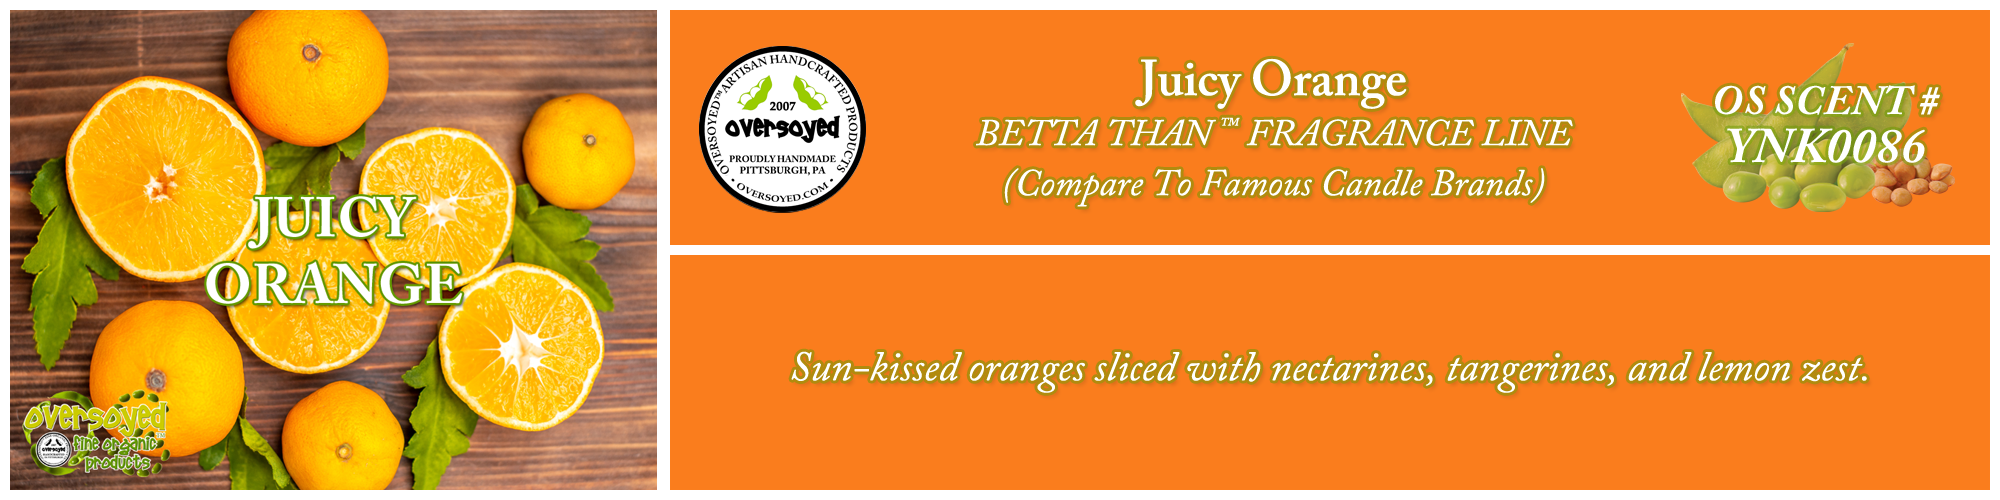 Juicy Orange Handcrafted Products Collection